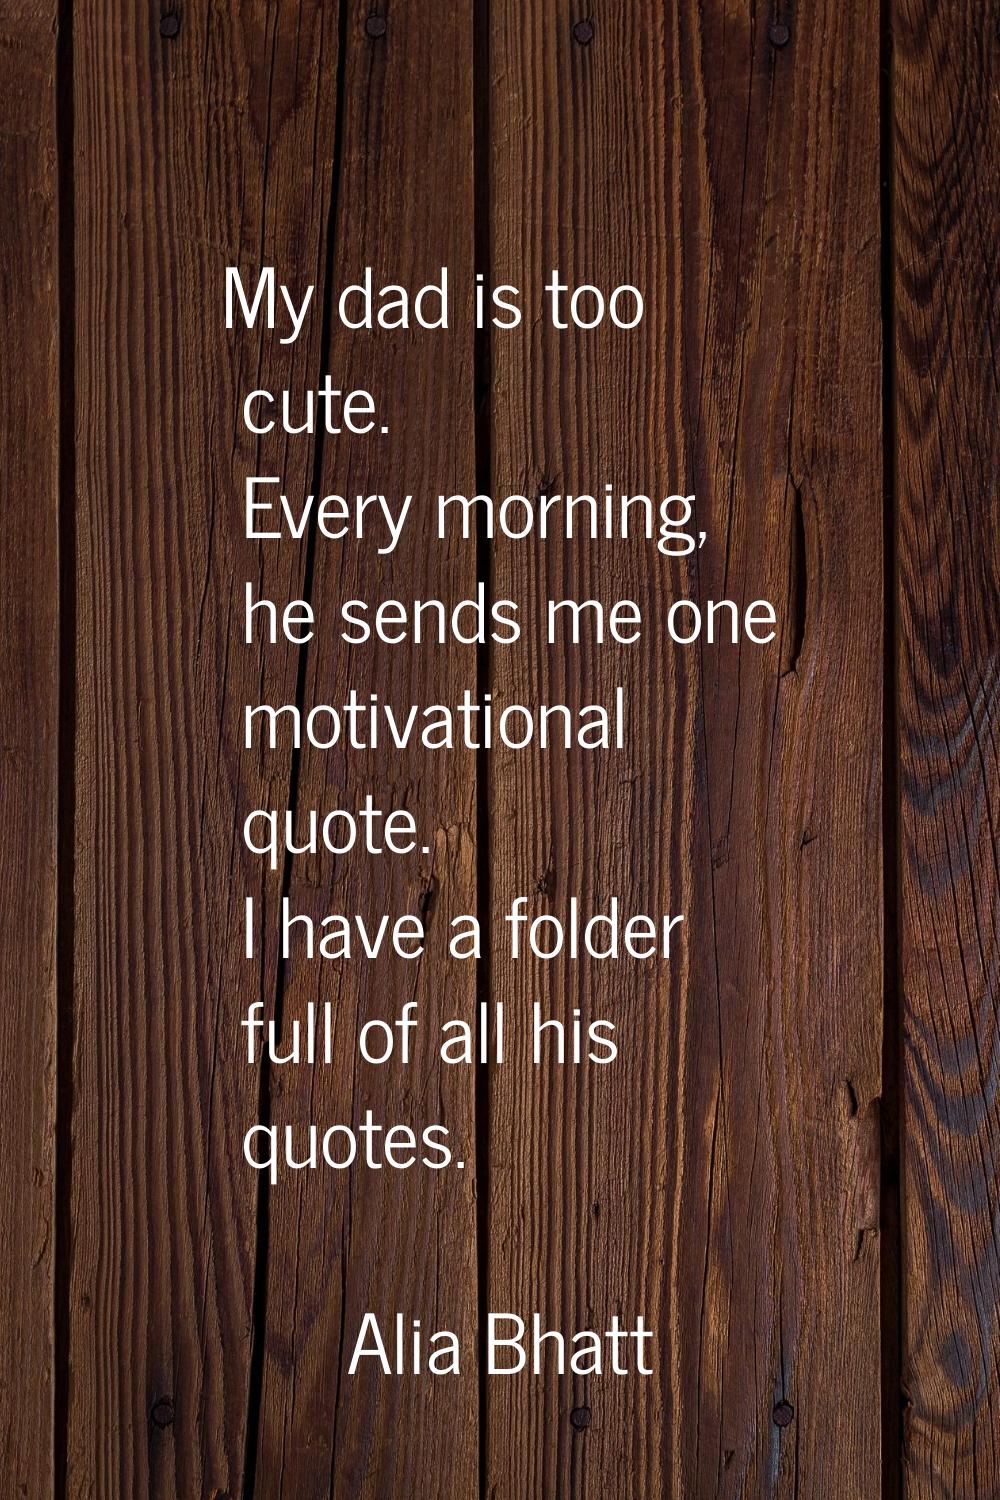 My dad is too cute. Every morning, he sends me one motivational quote. I have a folder full of all 